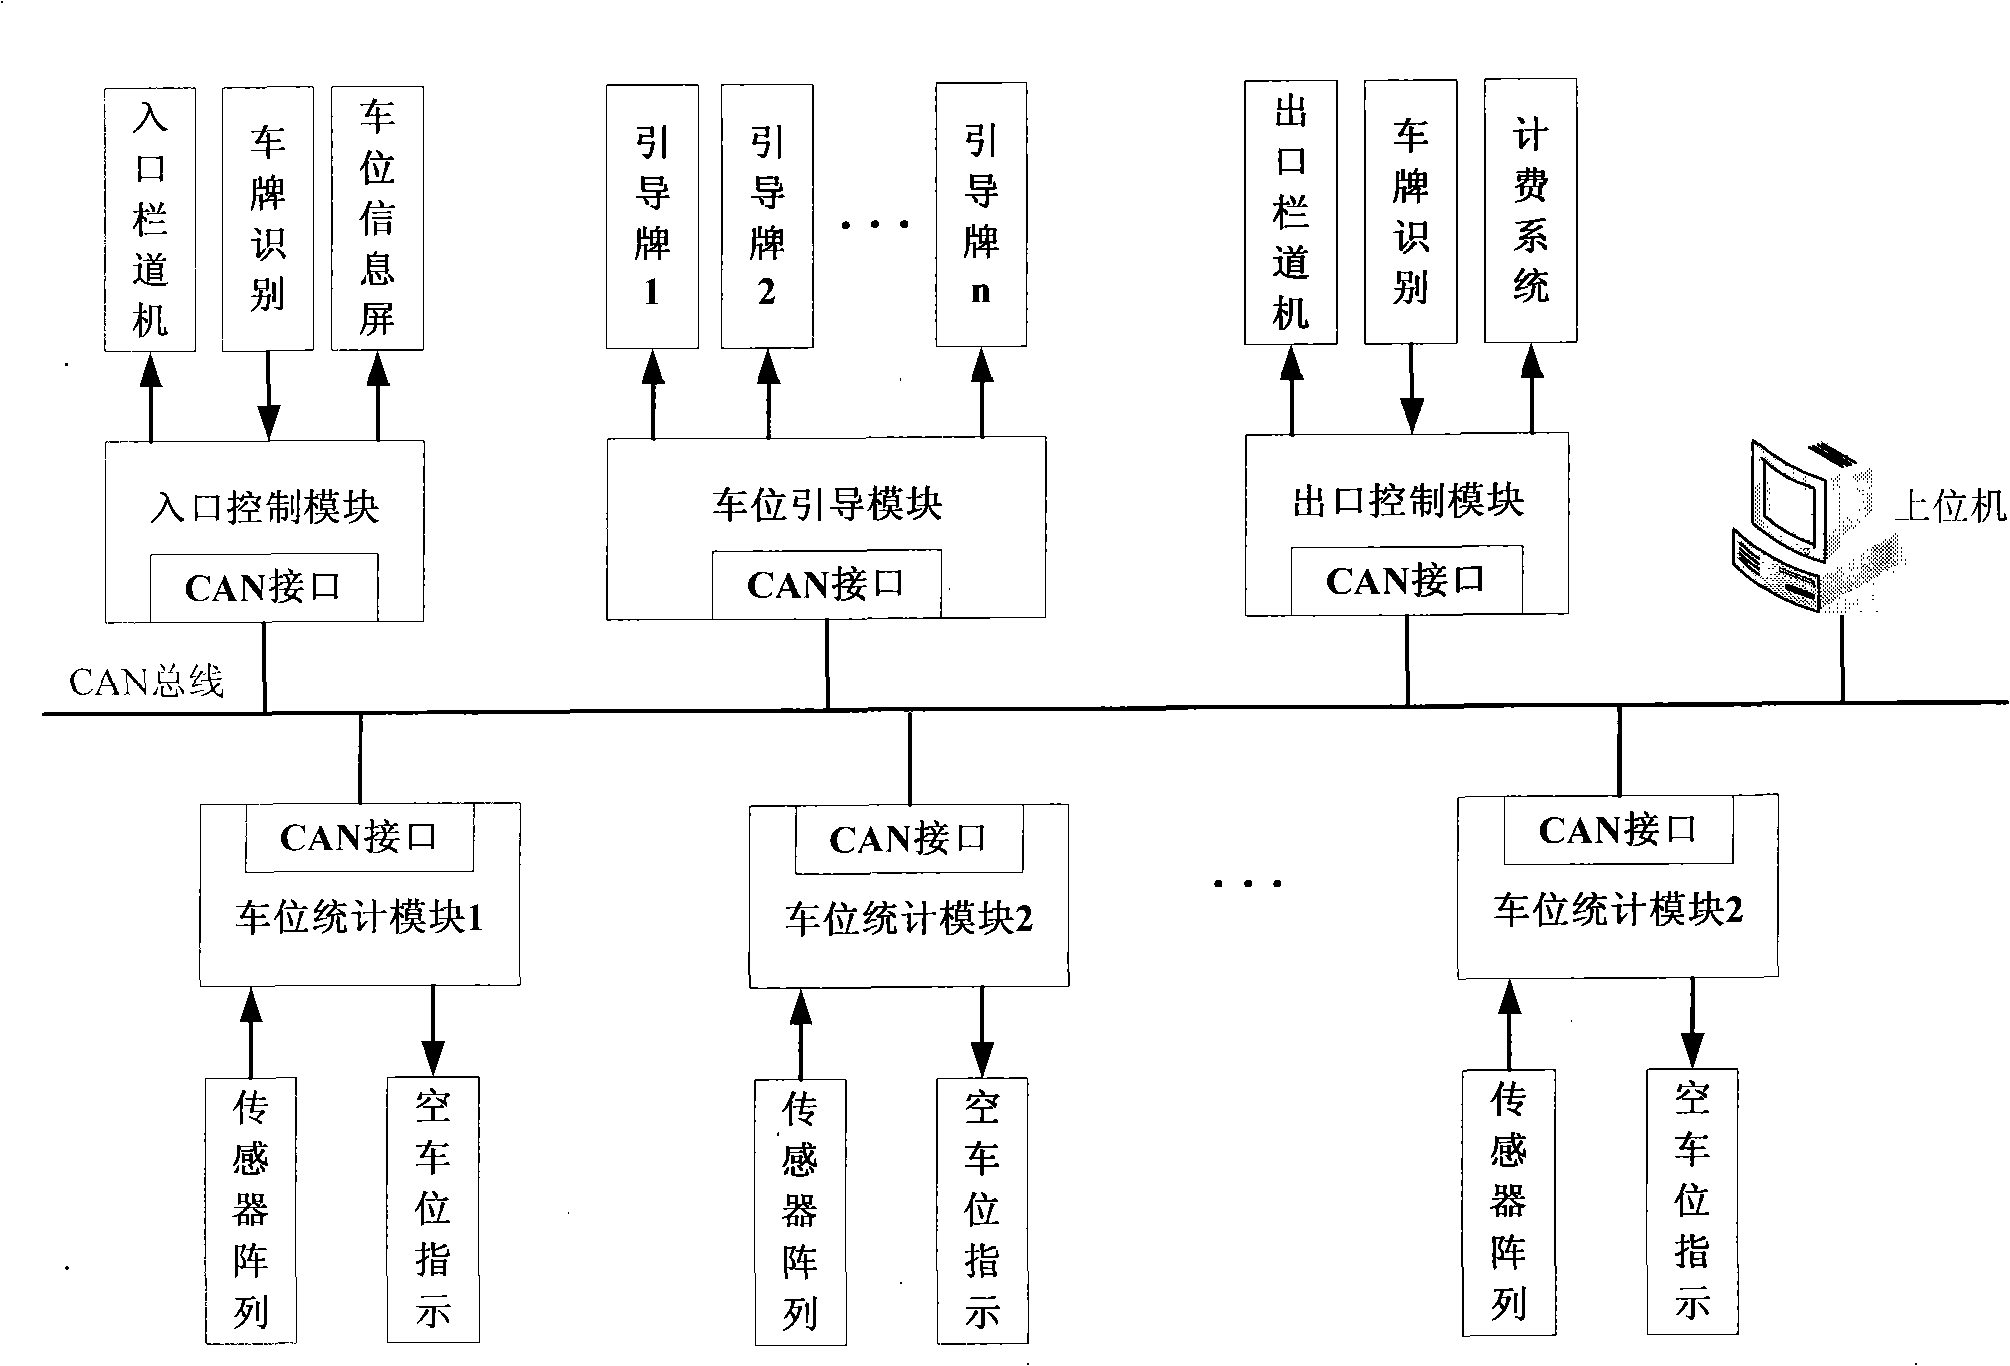 Vehicle parking system guiding and management system based on CAN bus